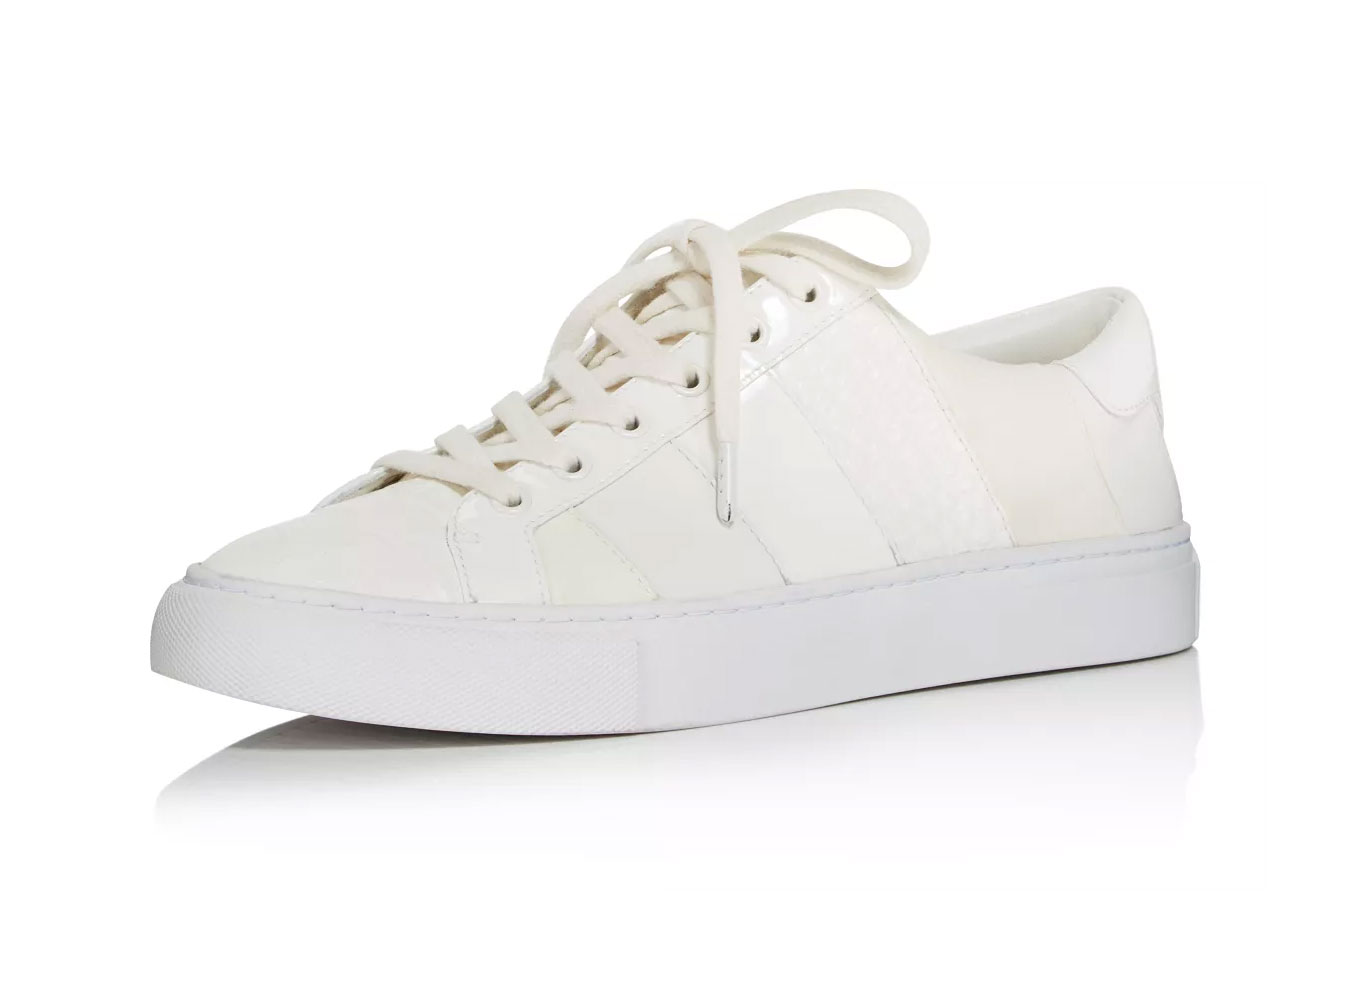 Tory Burch Women's Ames Leather & Suede Sneakers